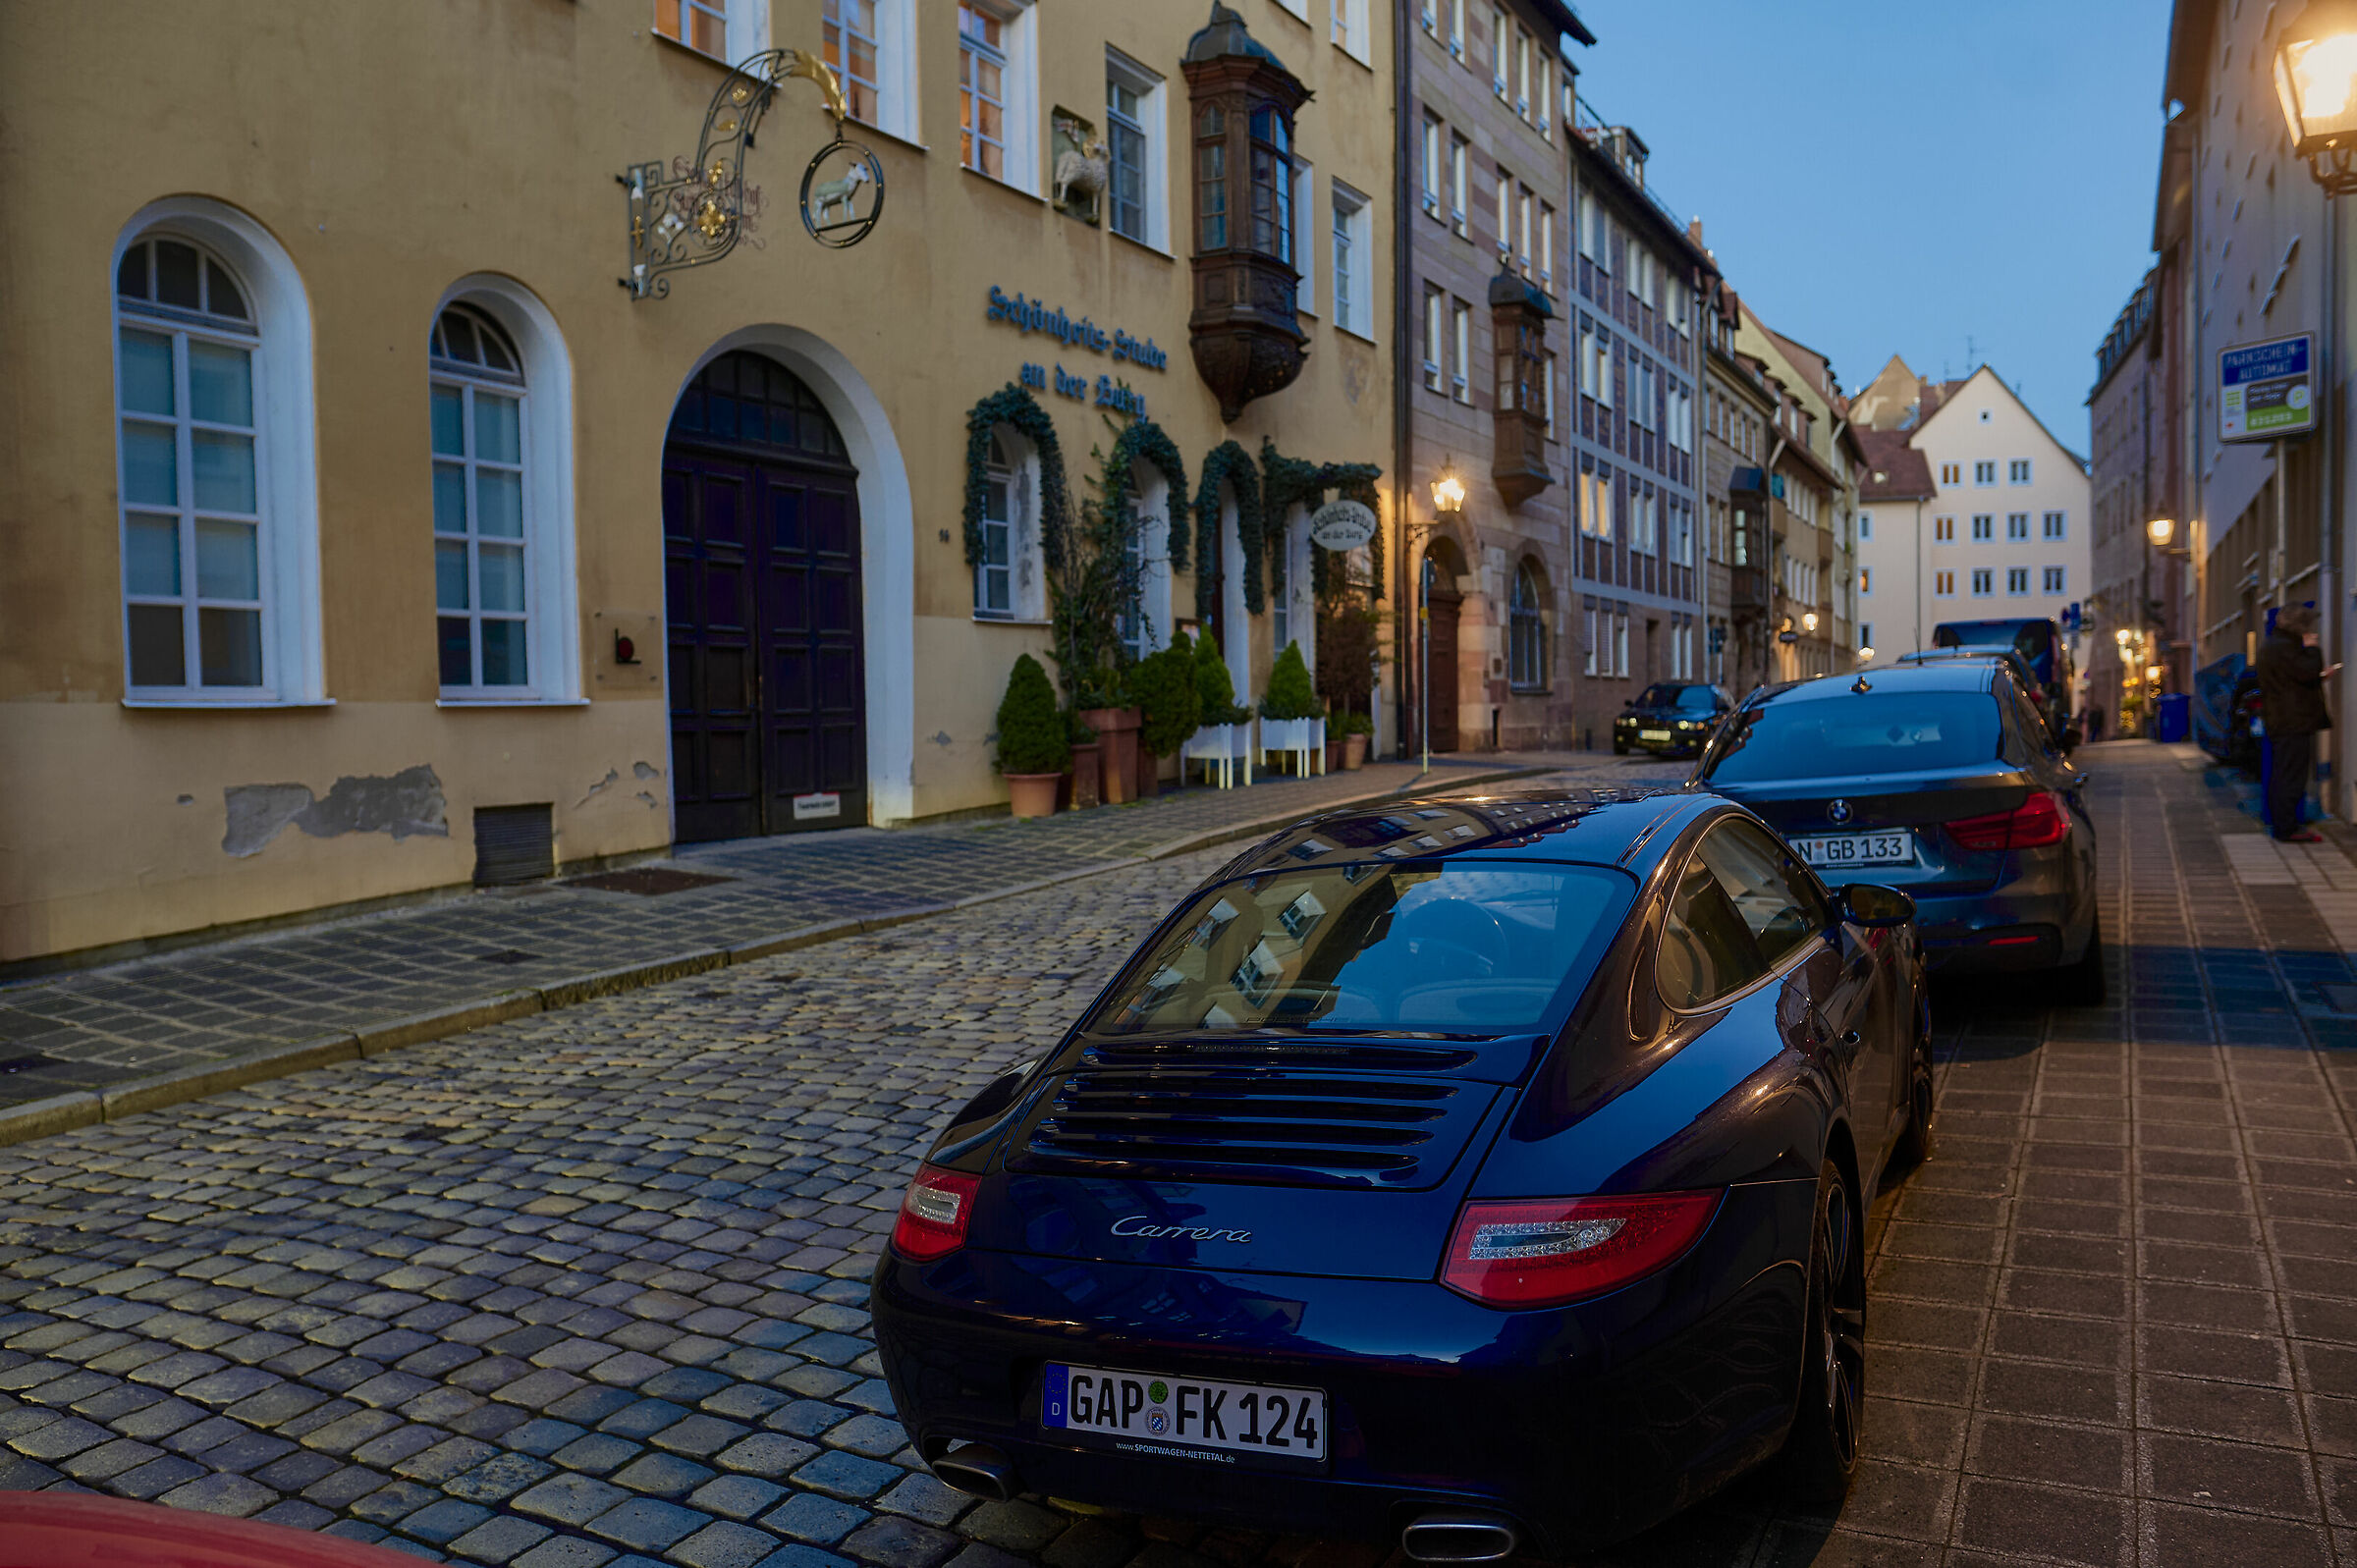 Luck is finding parking space in Nuremberg's old town...